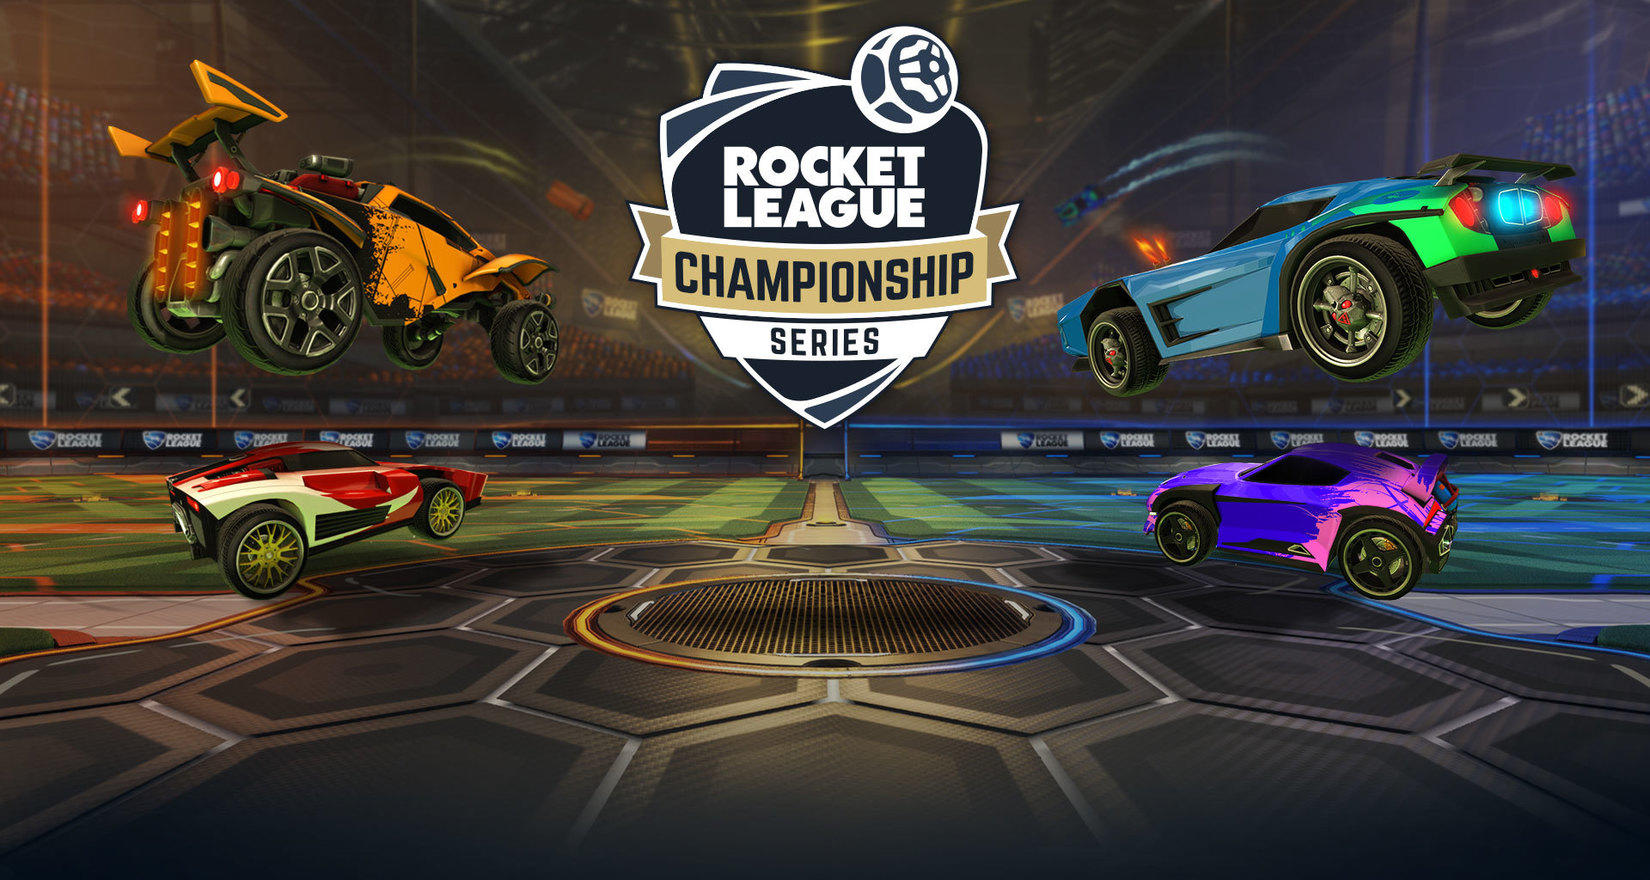 Rocket League Tournaments Are Now Live on Repeat